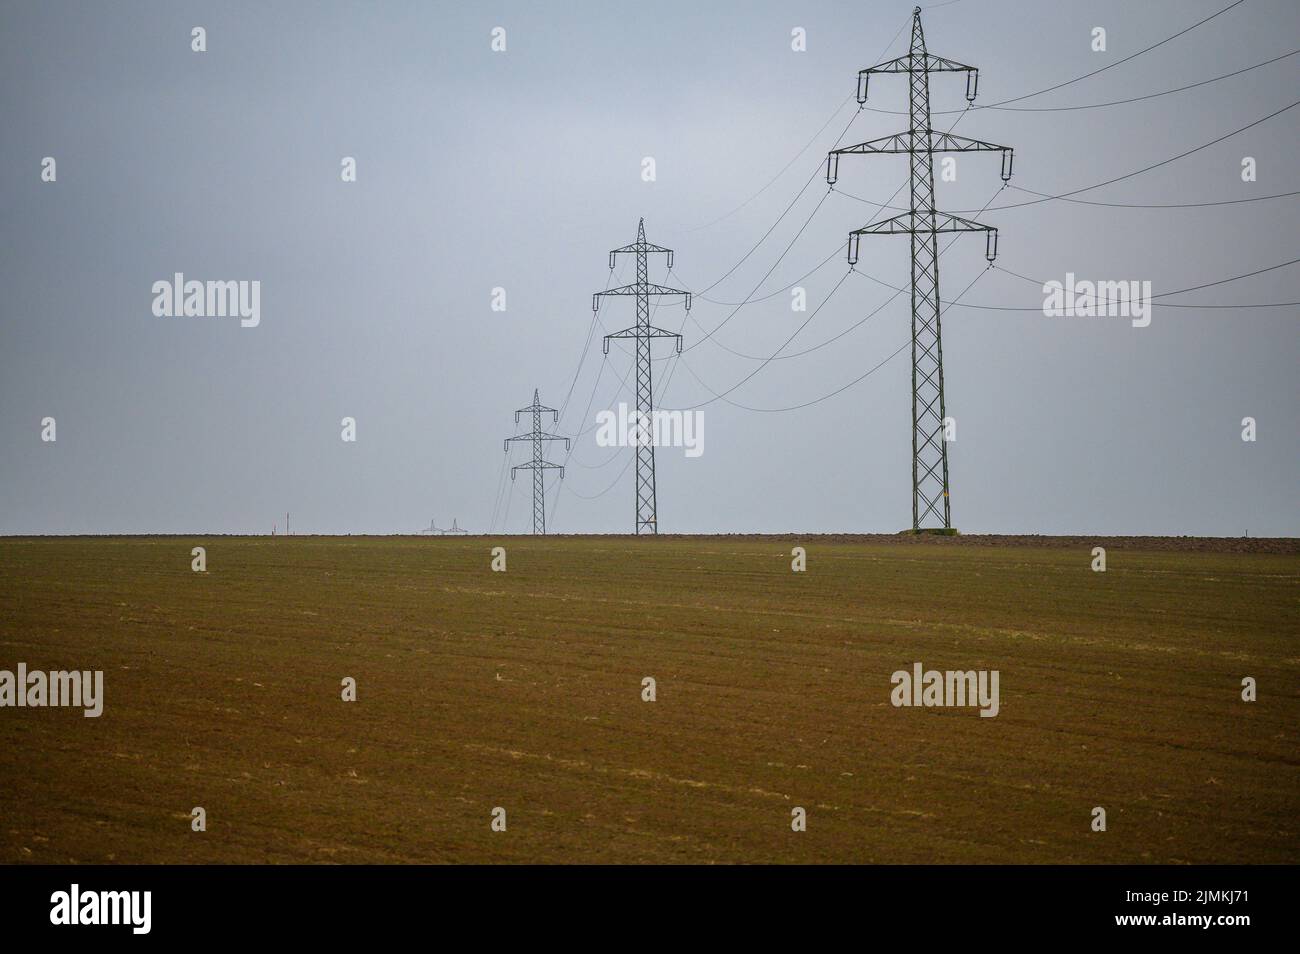 A high-voltage line runs over a bald field. The gray clouds of fog reinforce the wintry impression of the landscape. Stock Photo